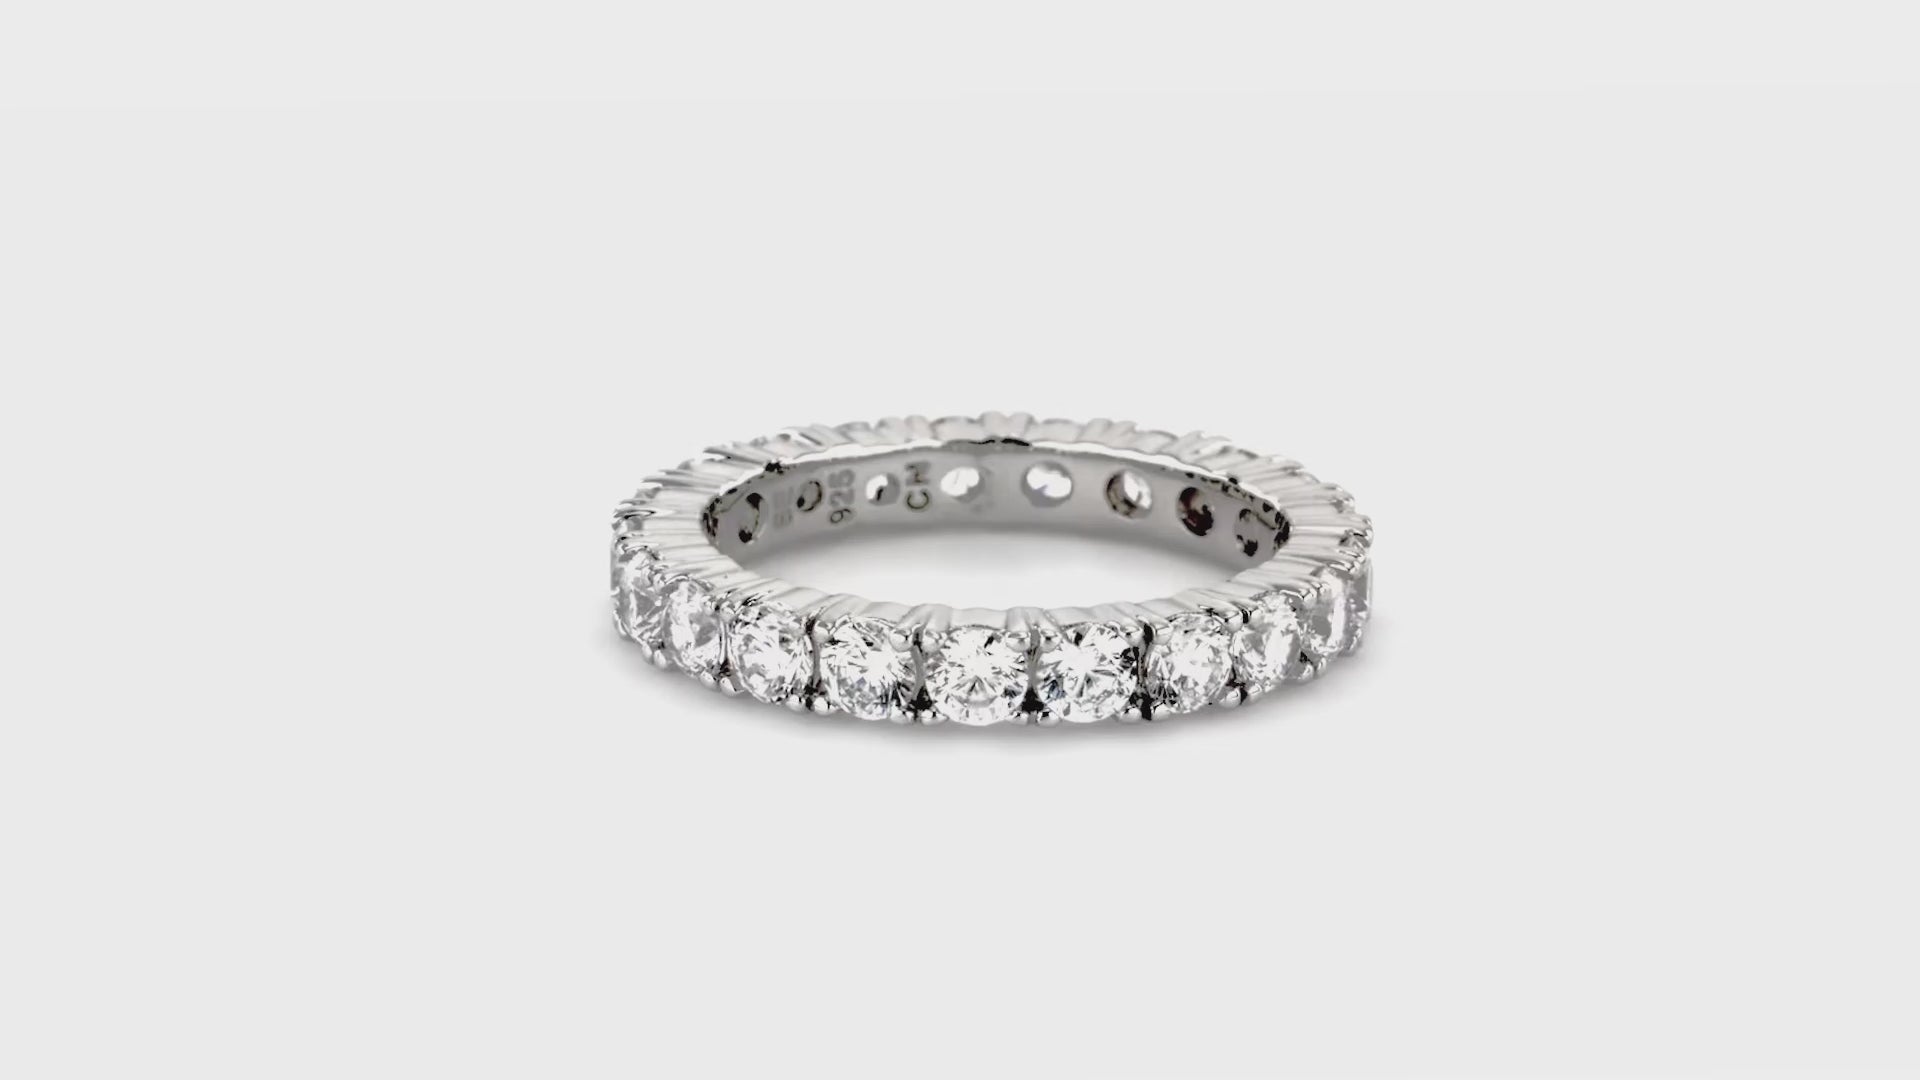 Video Contains CZ Eternity Ring in Sterling Silver. Style Number R1426-01